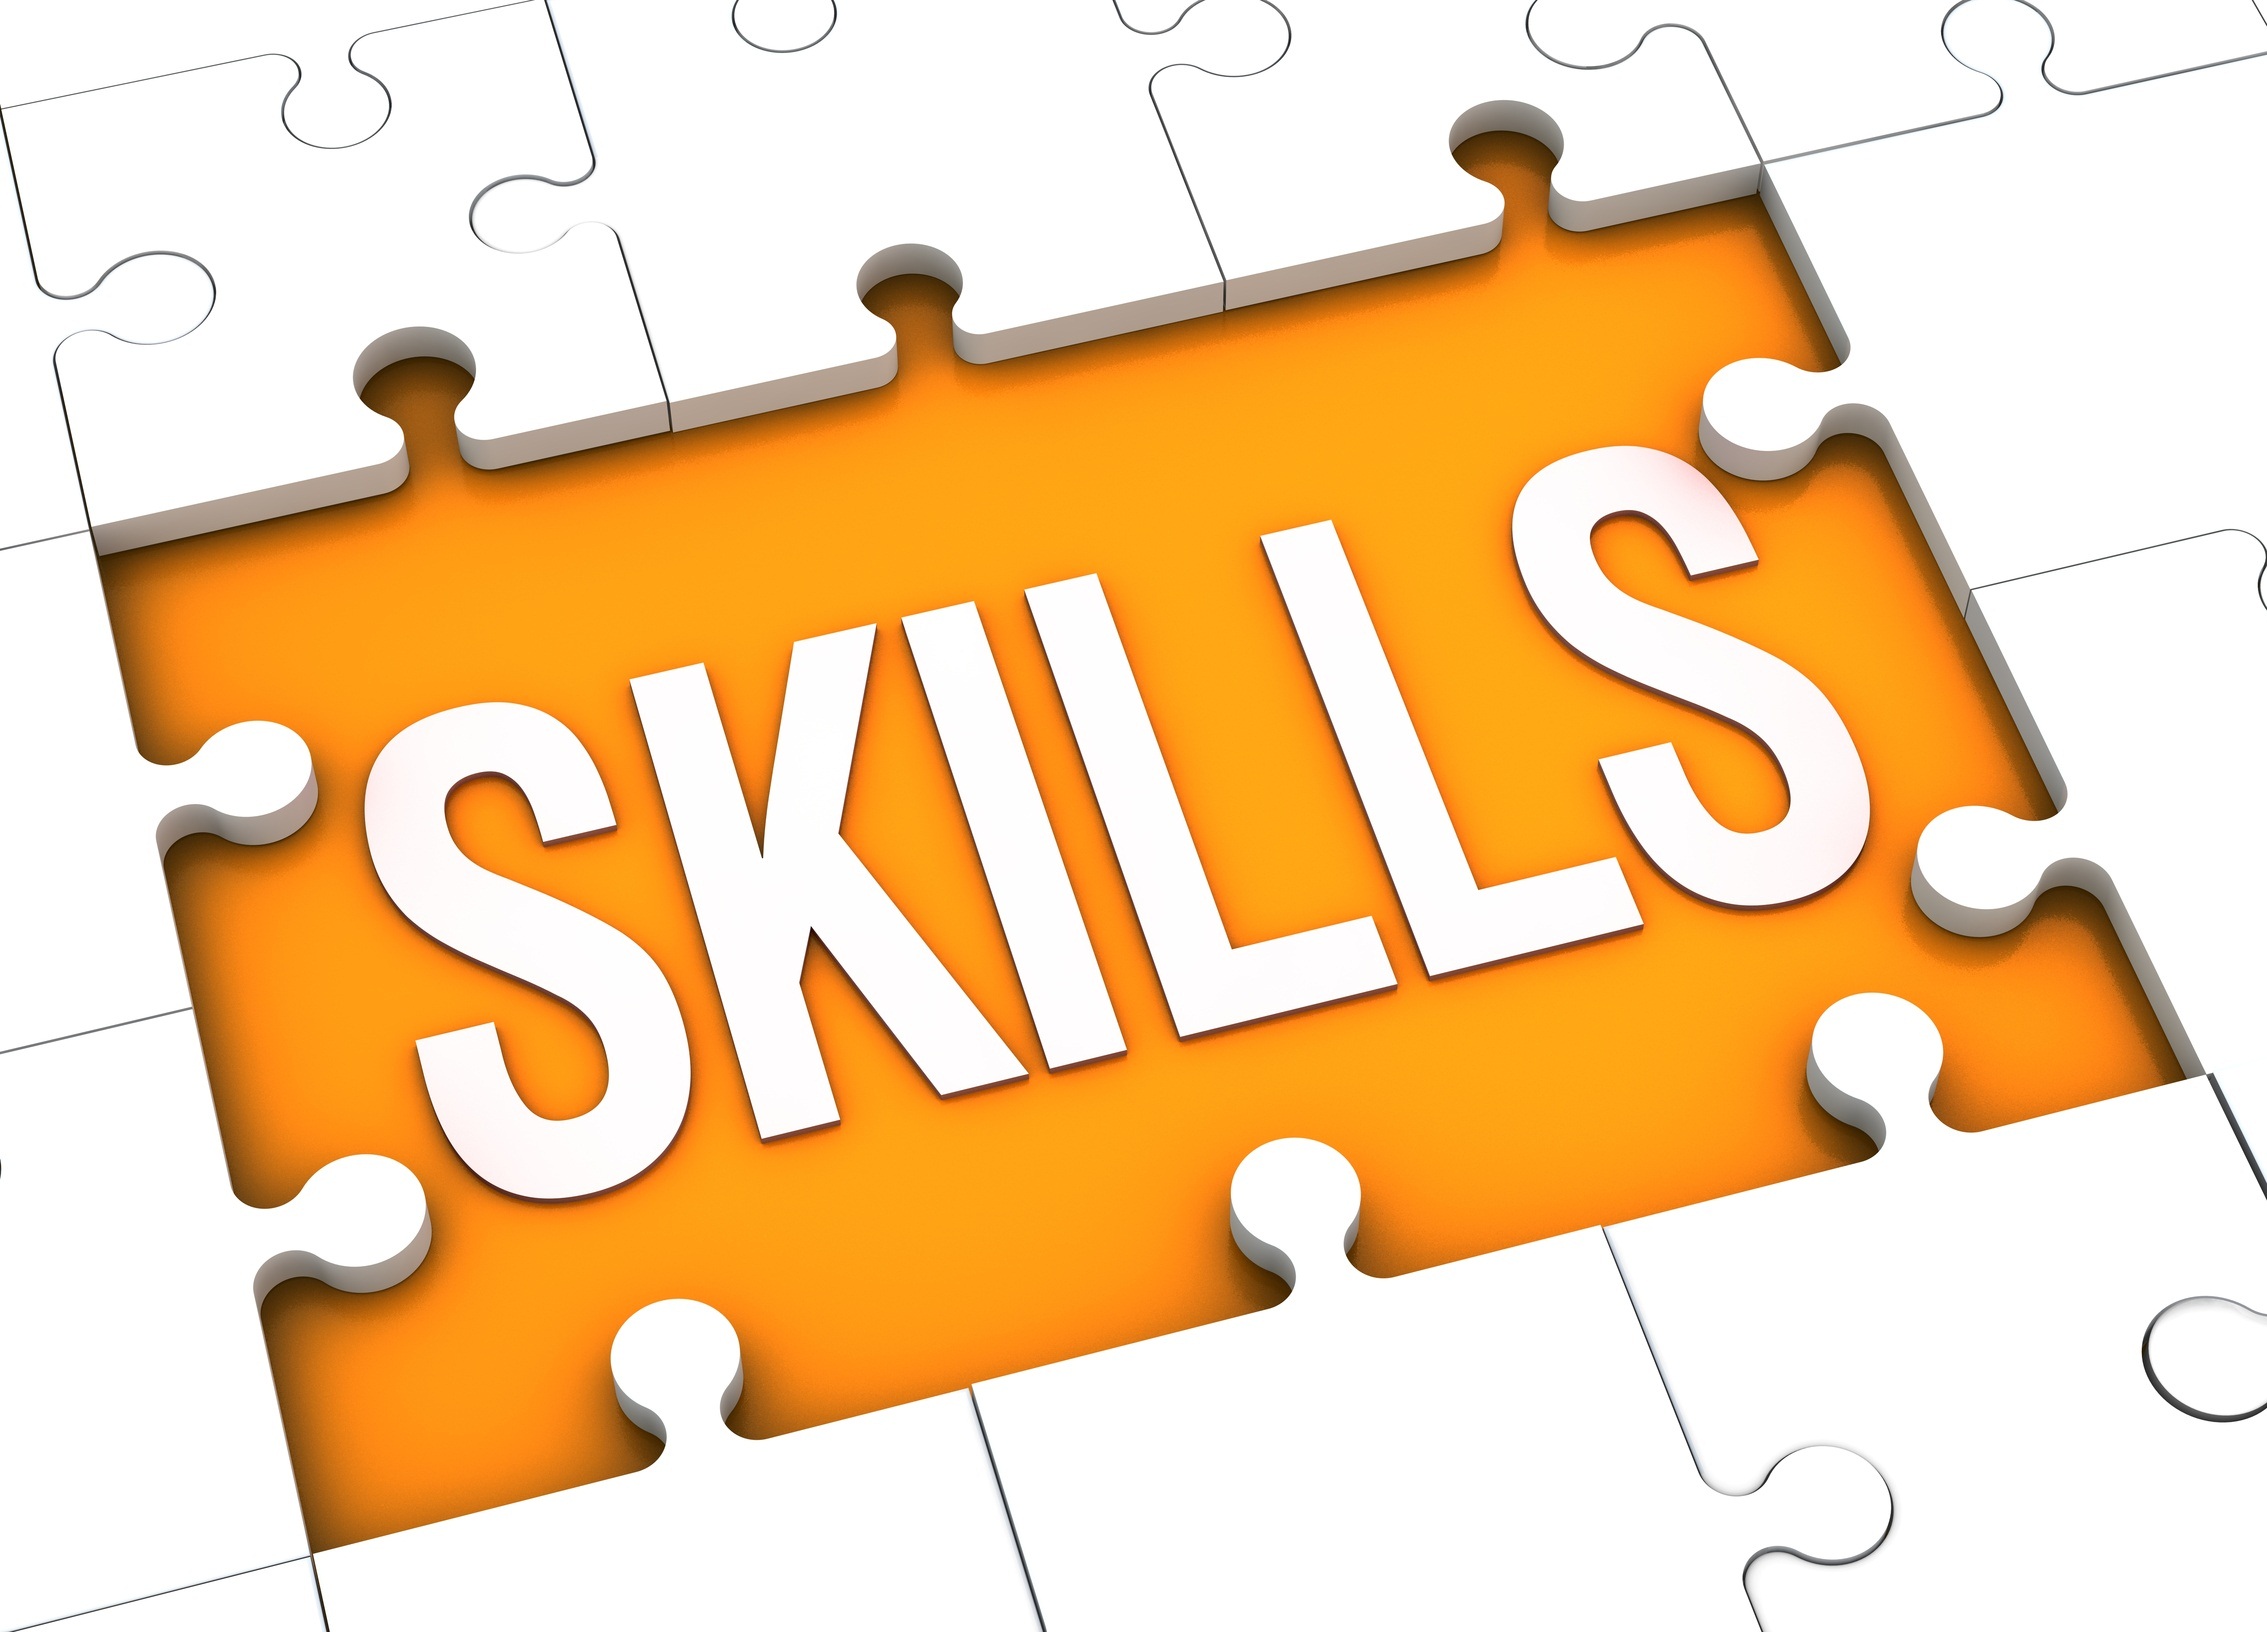 A puzzle piece with the word "skills" written on it, set against a vibrant orange background.